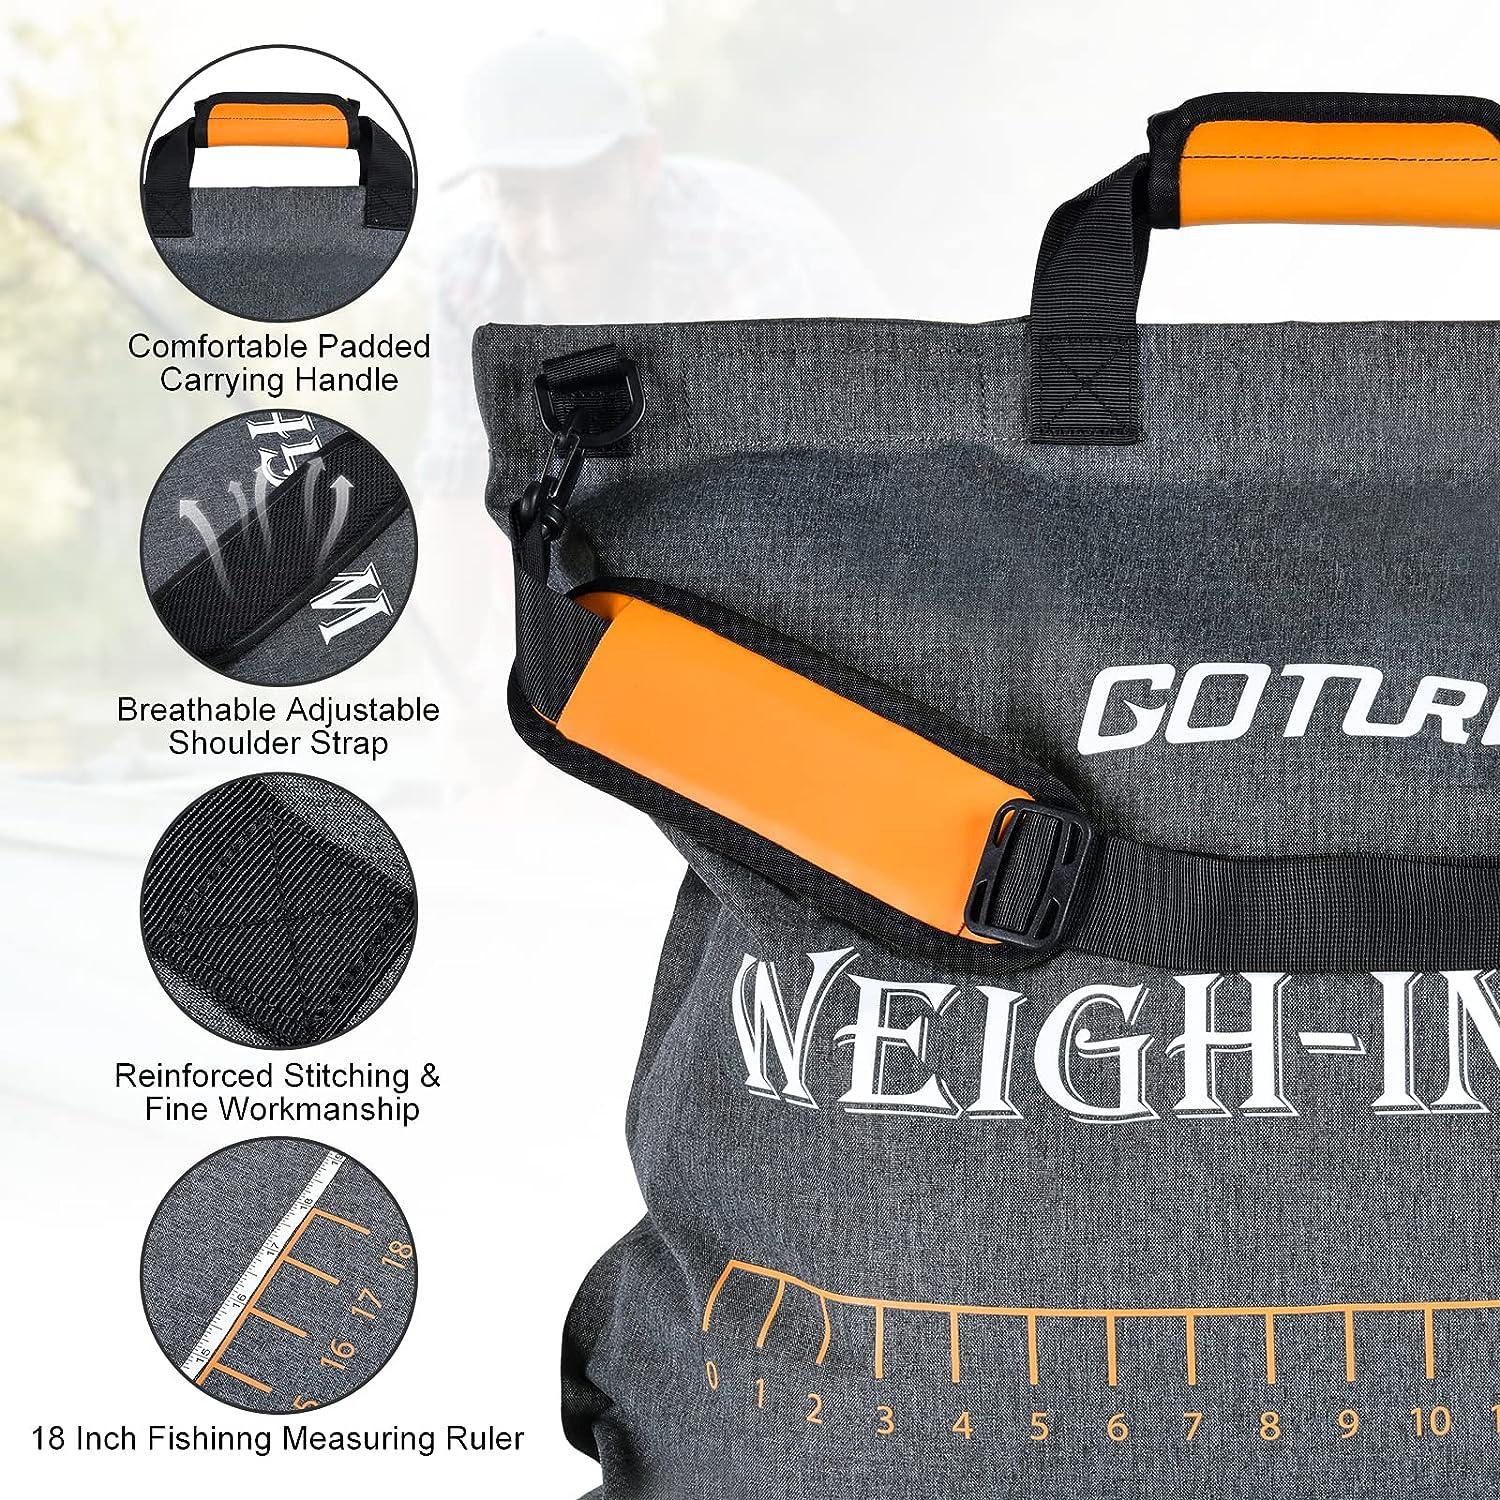 Goture Tournament Fishing Bag,Bass Weigh in Bag with Built-in